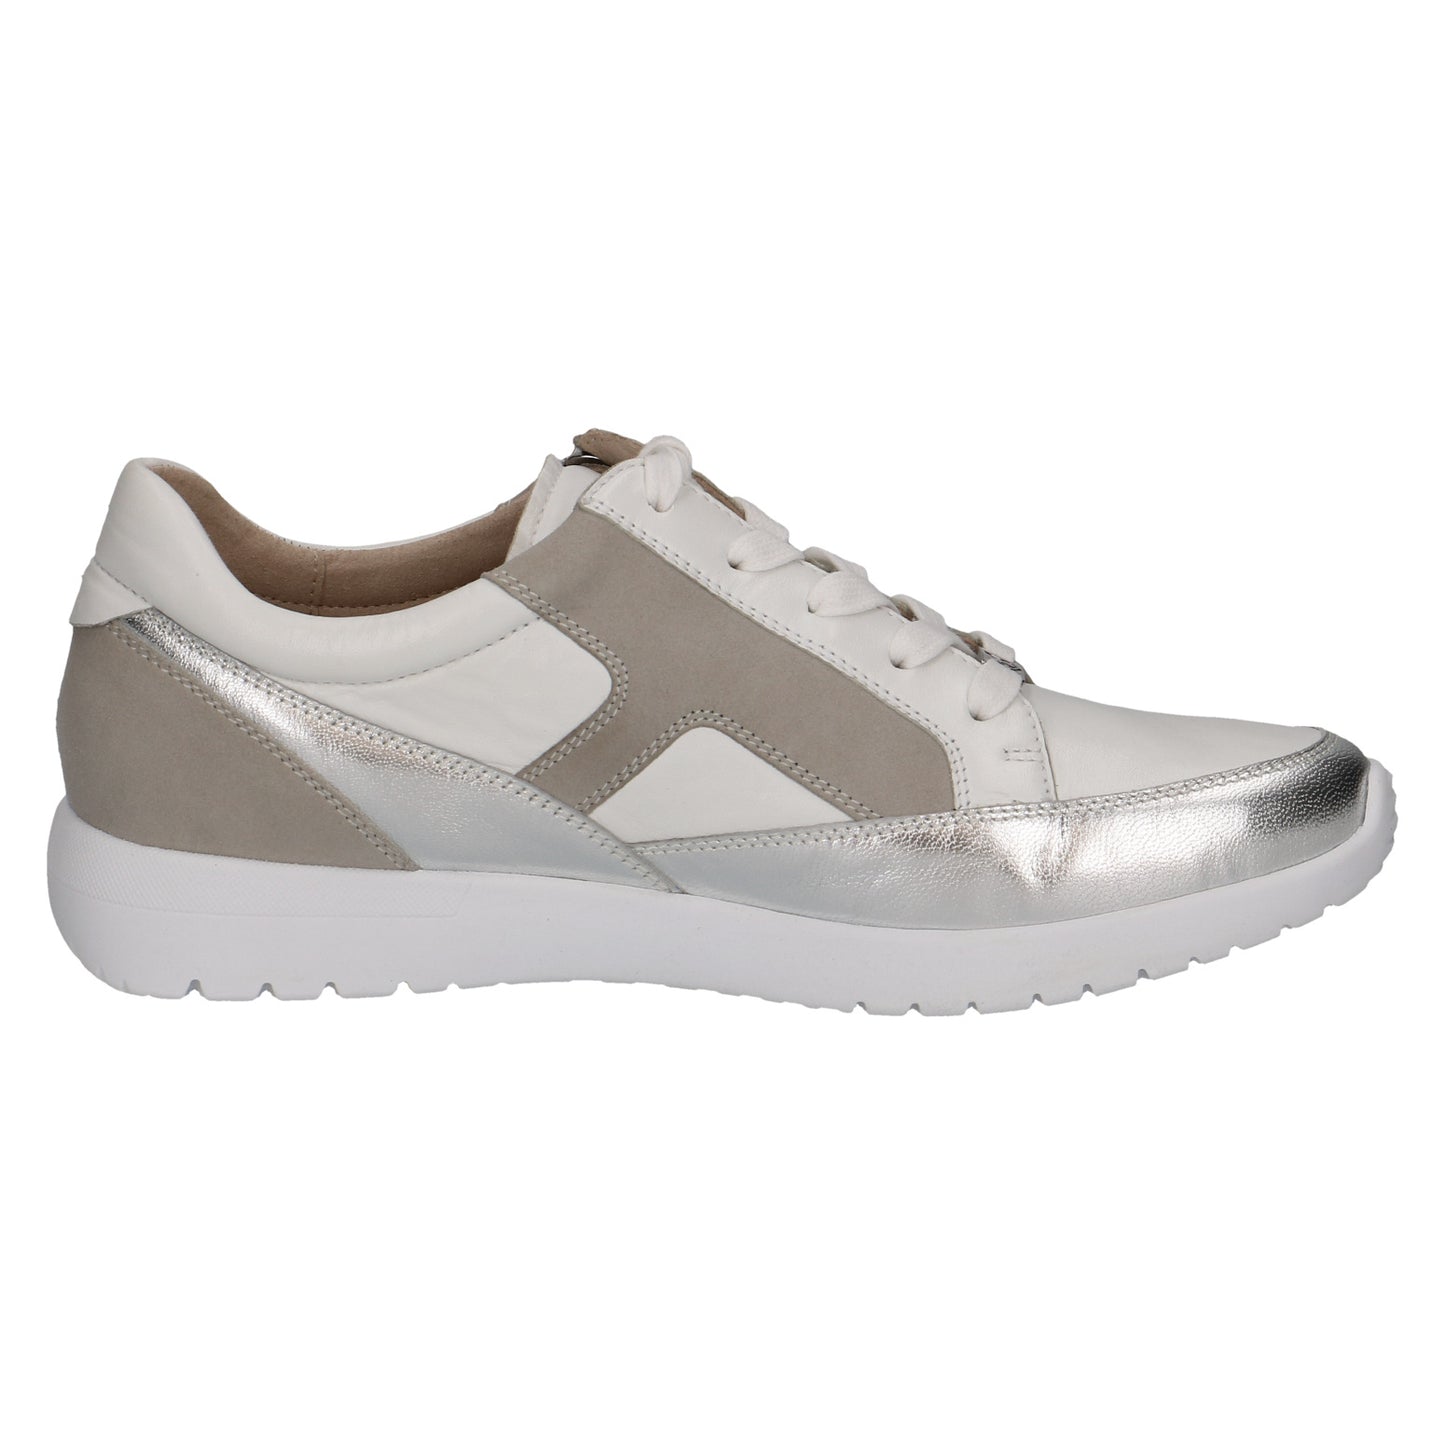 Caprice - Ladies Shoes Trainers White, Siver (1880)